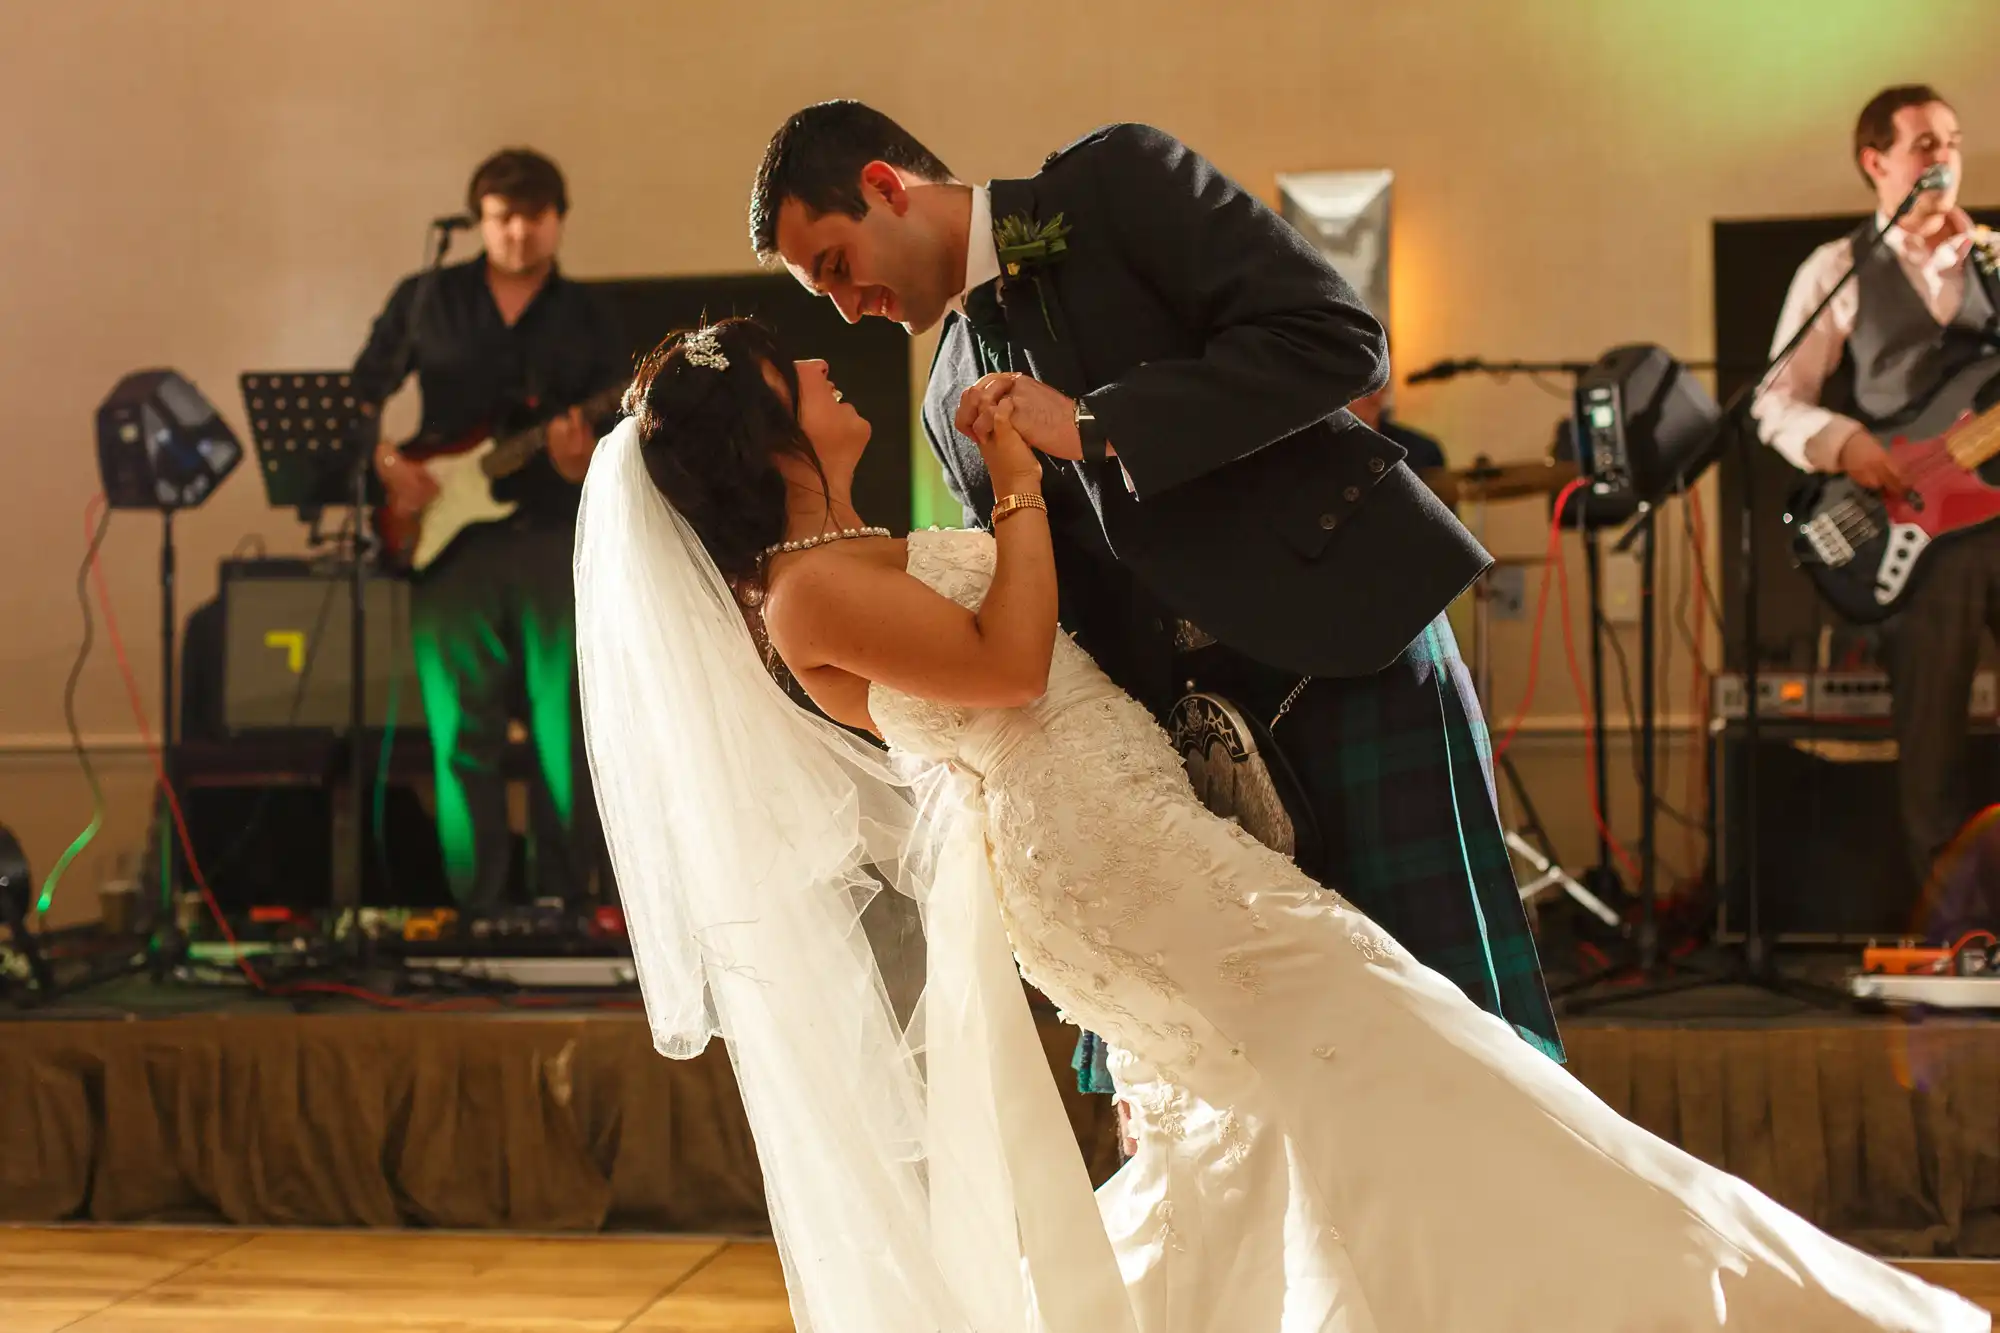 A bride and groom share a dance in a ballroom with a live band performing in the background. the groom is in a kilt and the bride is in a long white dress.